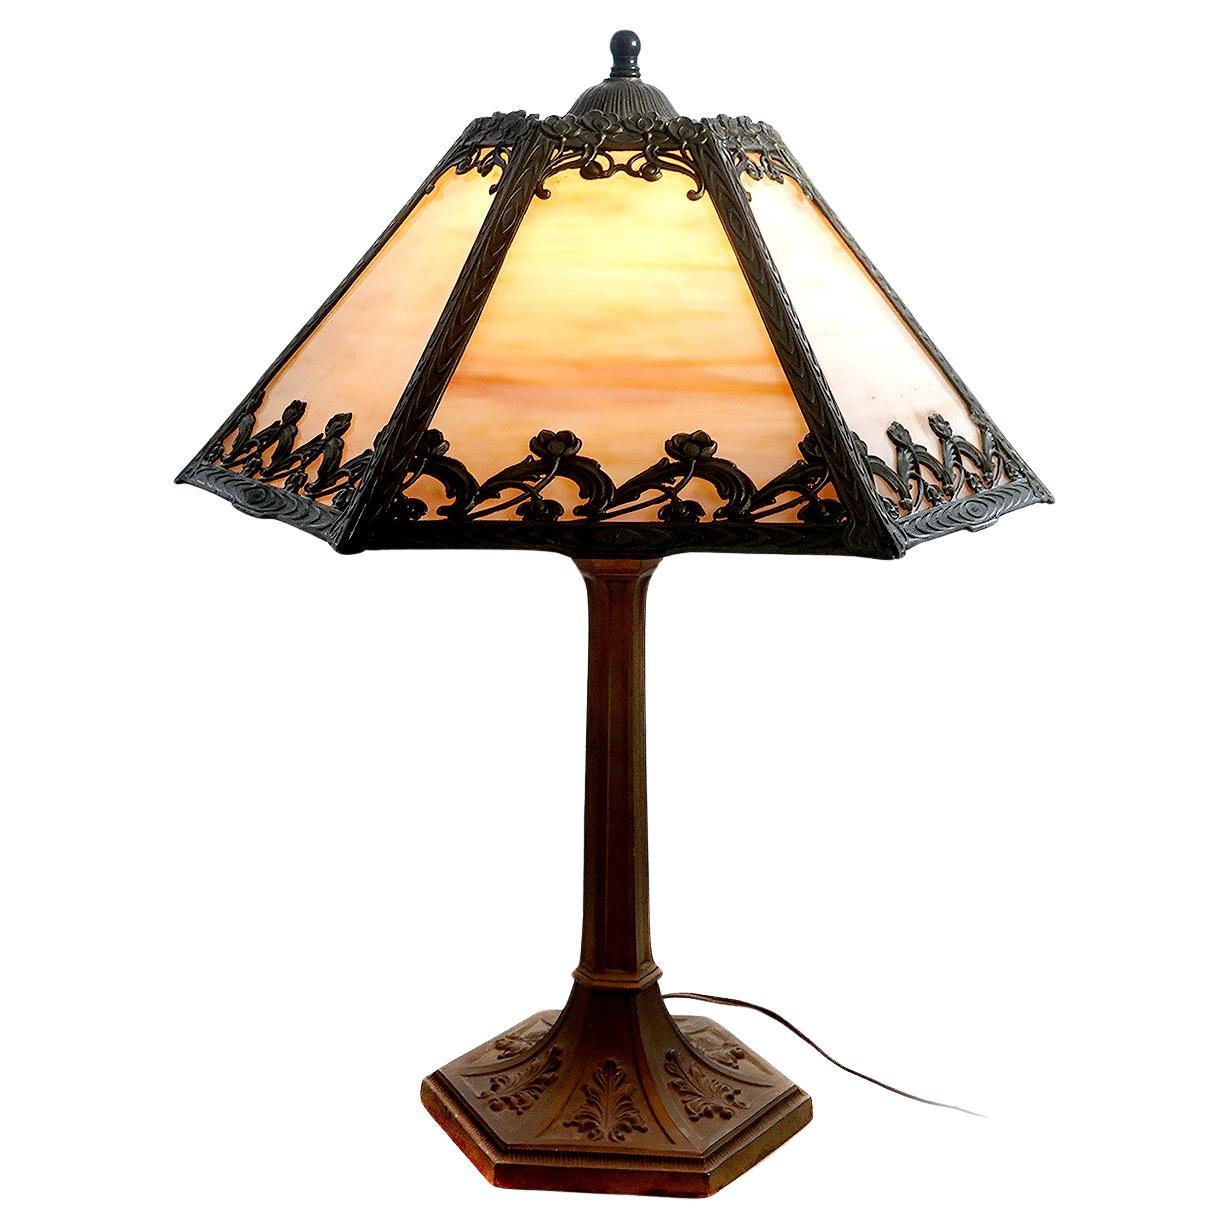 6 Panel Stained Glass Table Lamp with Floral Filigree Overlay